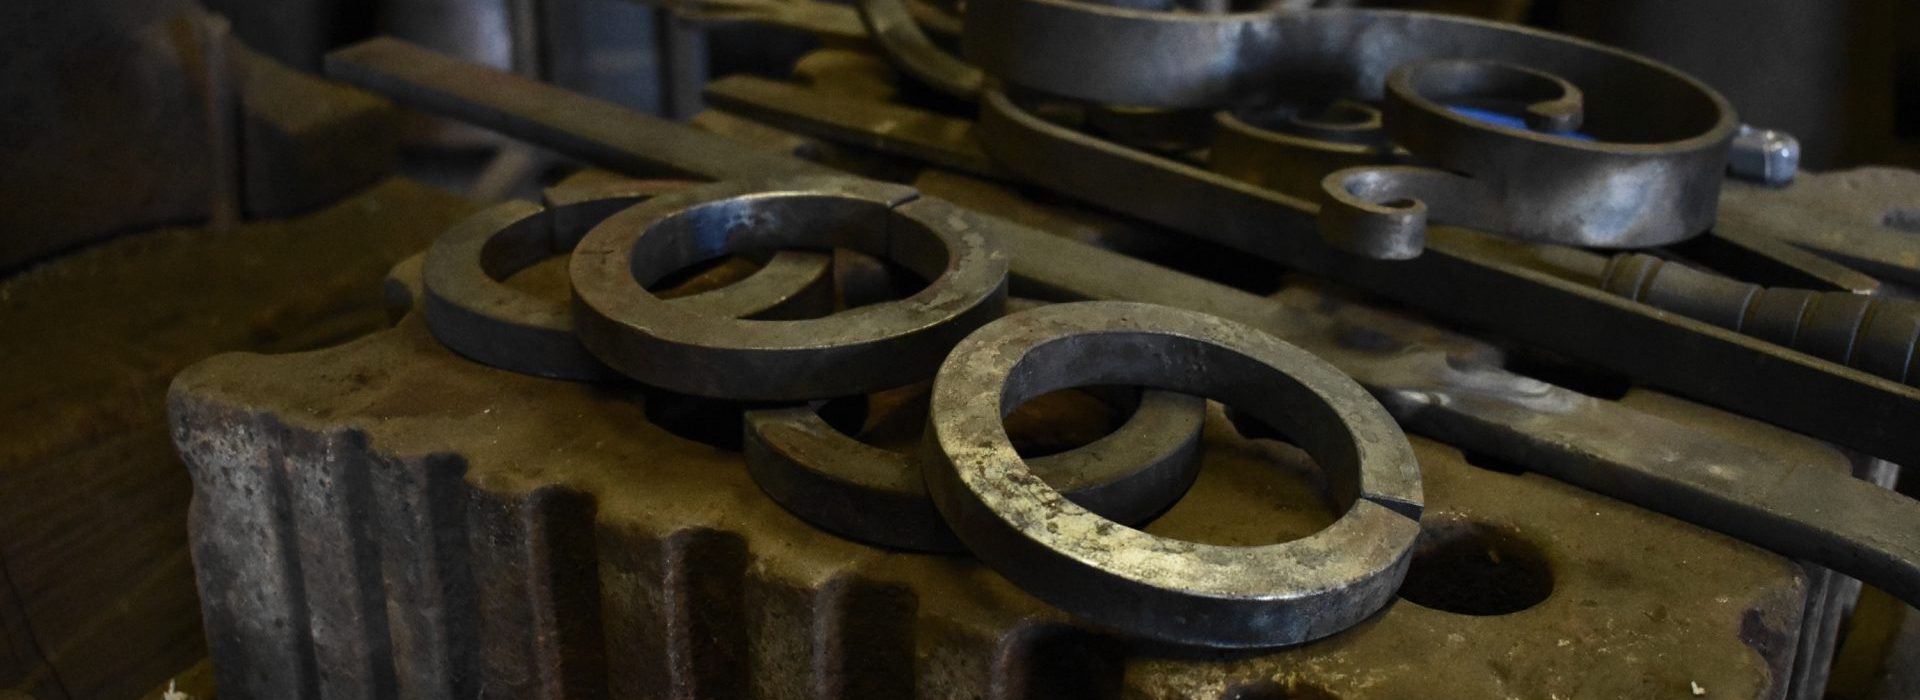 Rings used in the forge at The Blacksmith Shop.